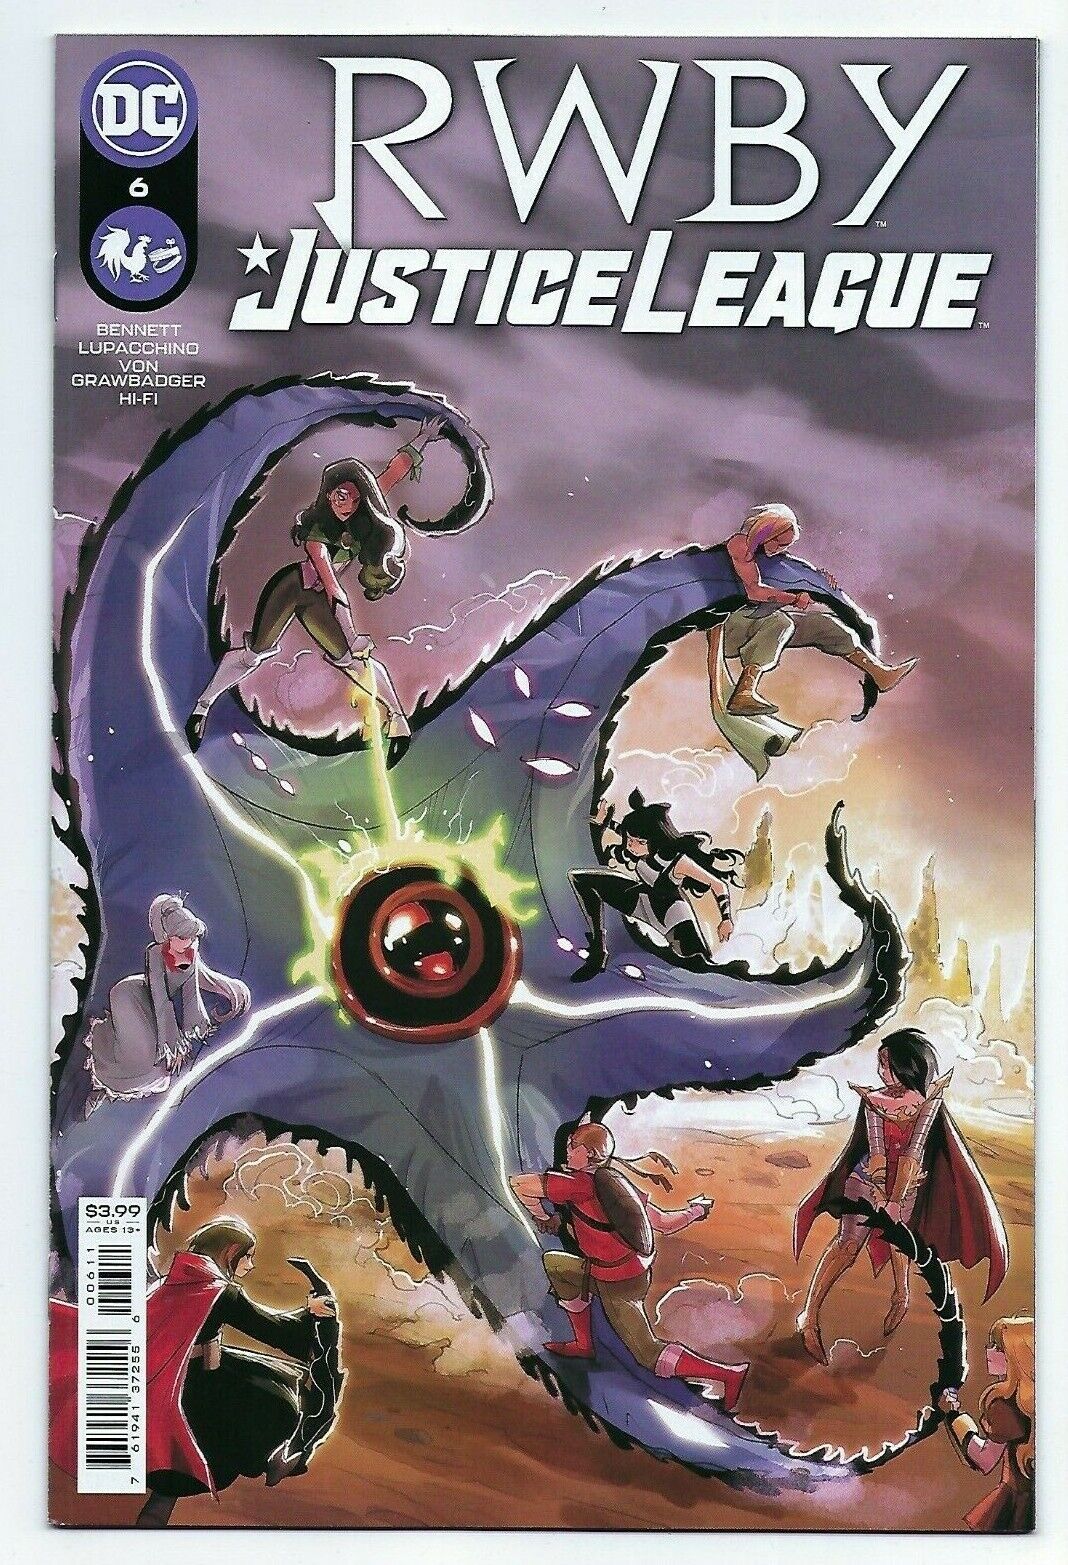 DC Comics RWBY JUSTICE LEAGUE #6 first printing cover A